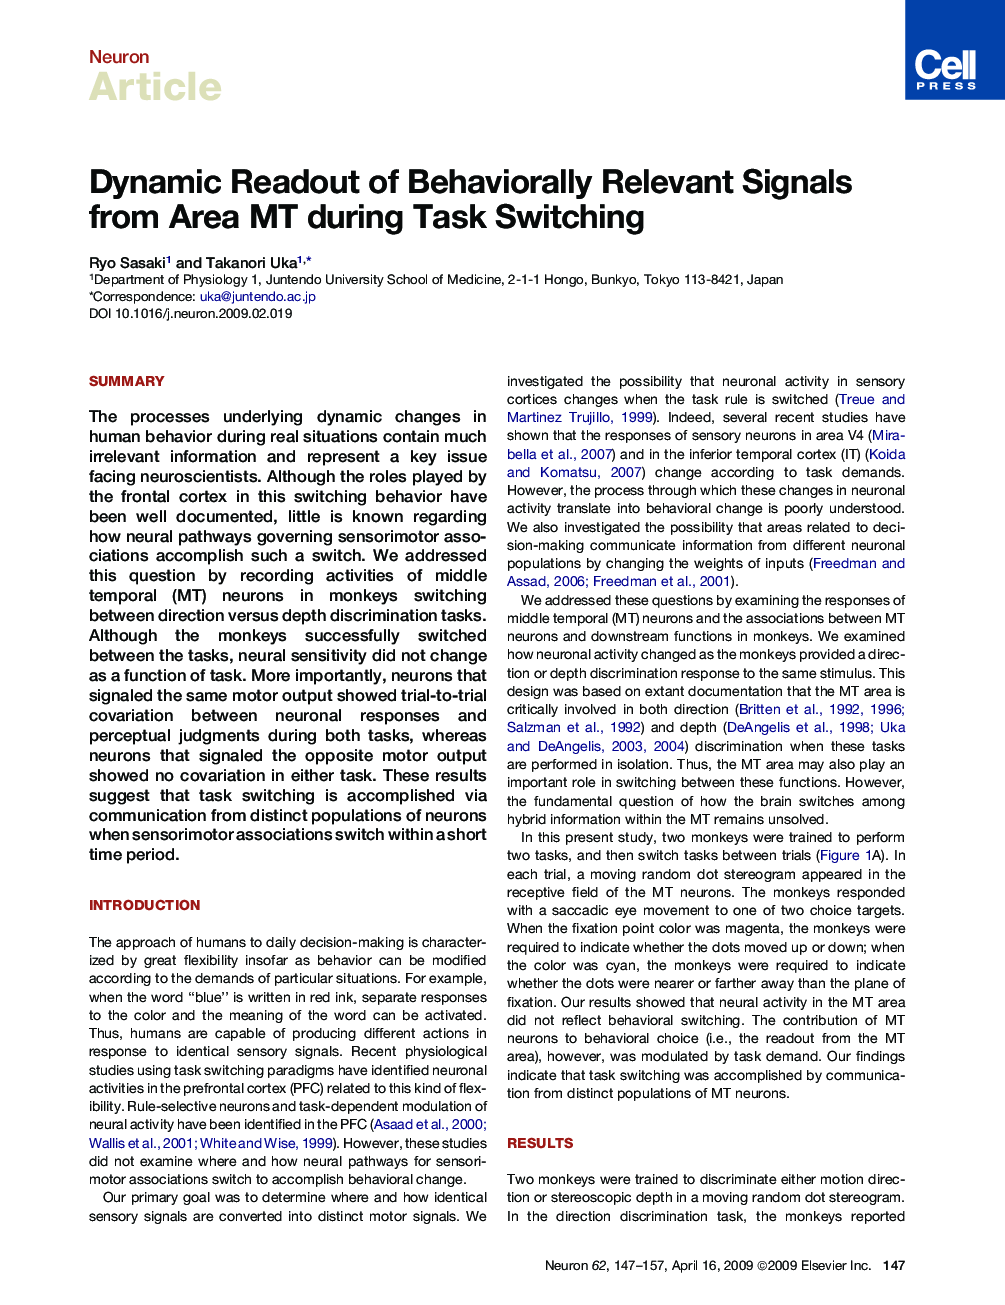 Dynamic Readout of Behaviorally Relevant Signals from Area MT during Task Switching